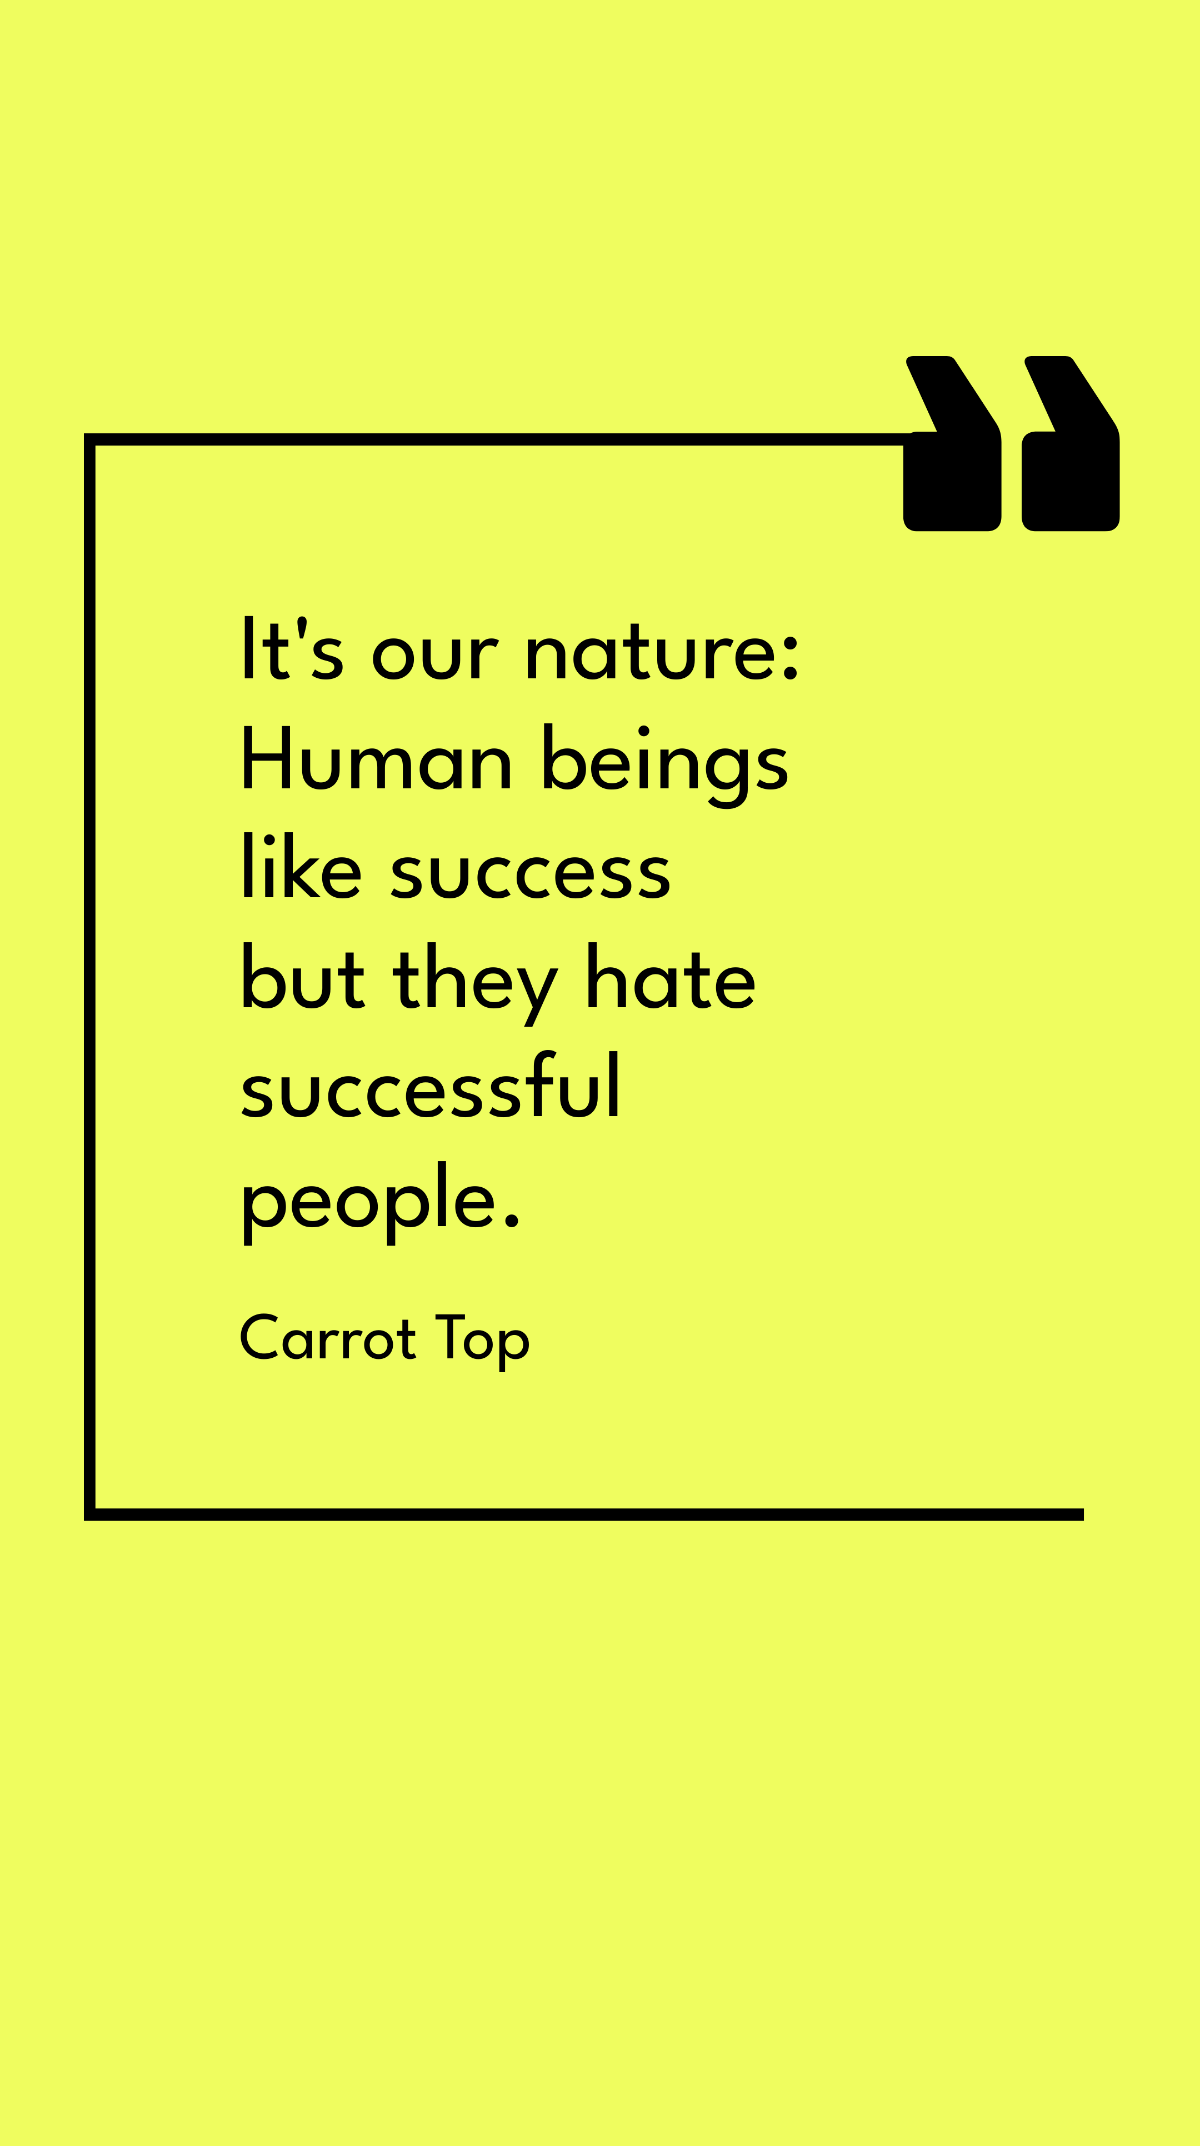 Carrot Top - It's our nature: Human beings like success but they hate successful people.